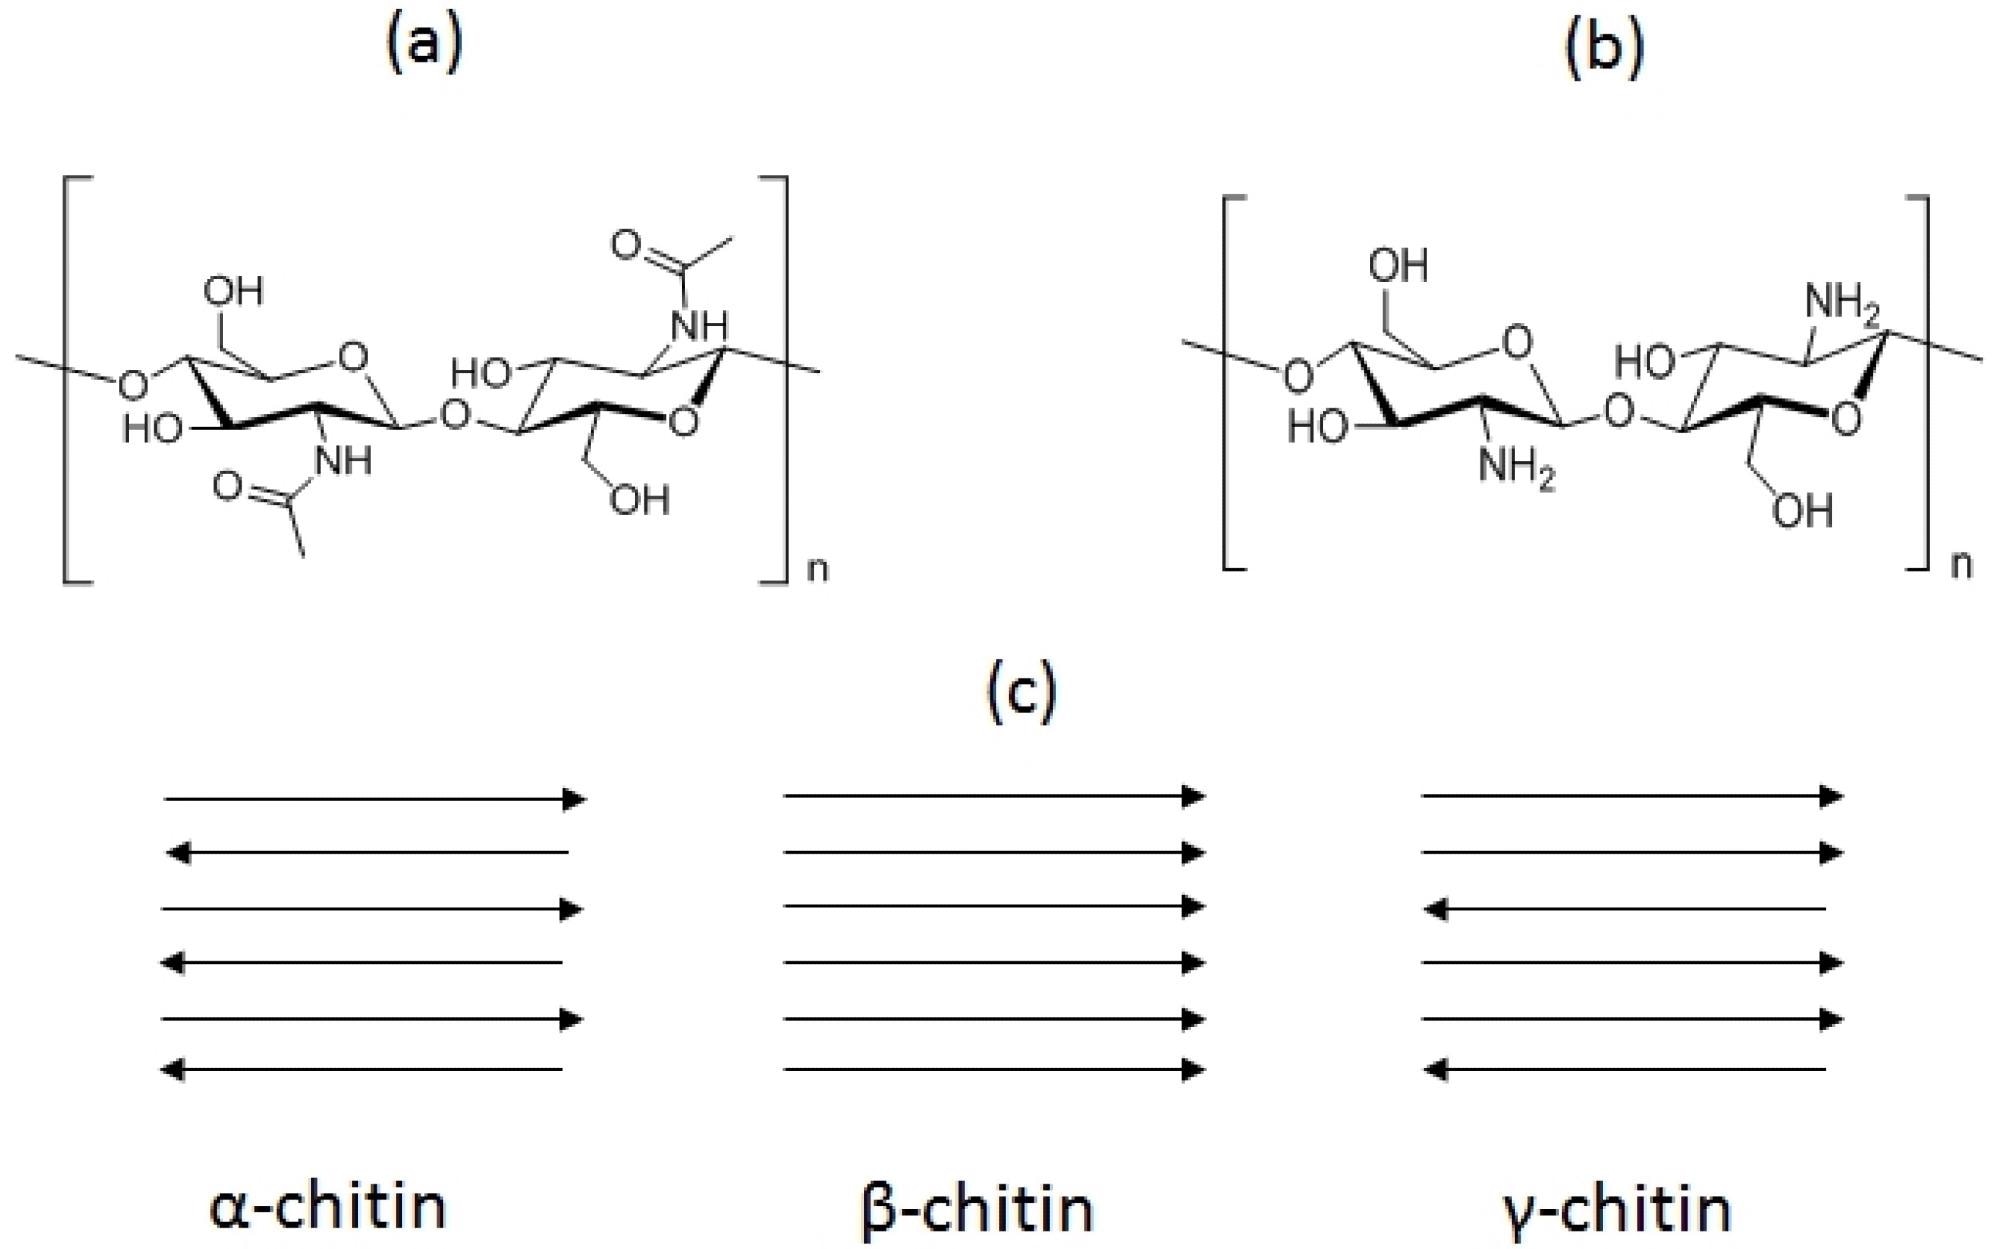 Basic structures of chitin (a) and chitosan (b) and chitin allomorphs (c). The tips of the arrows indicate the positions of the reducing ends of the chains.